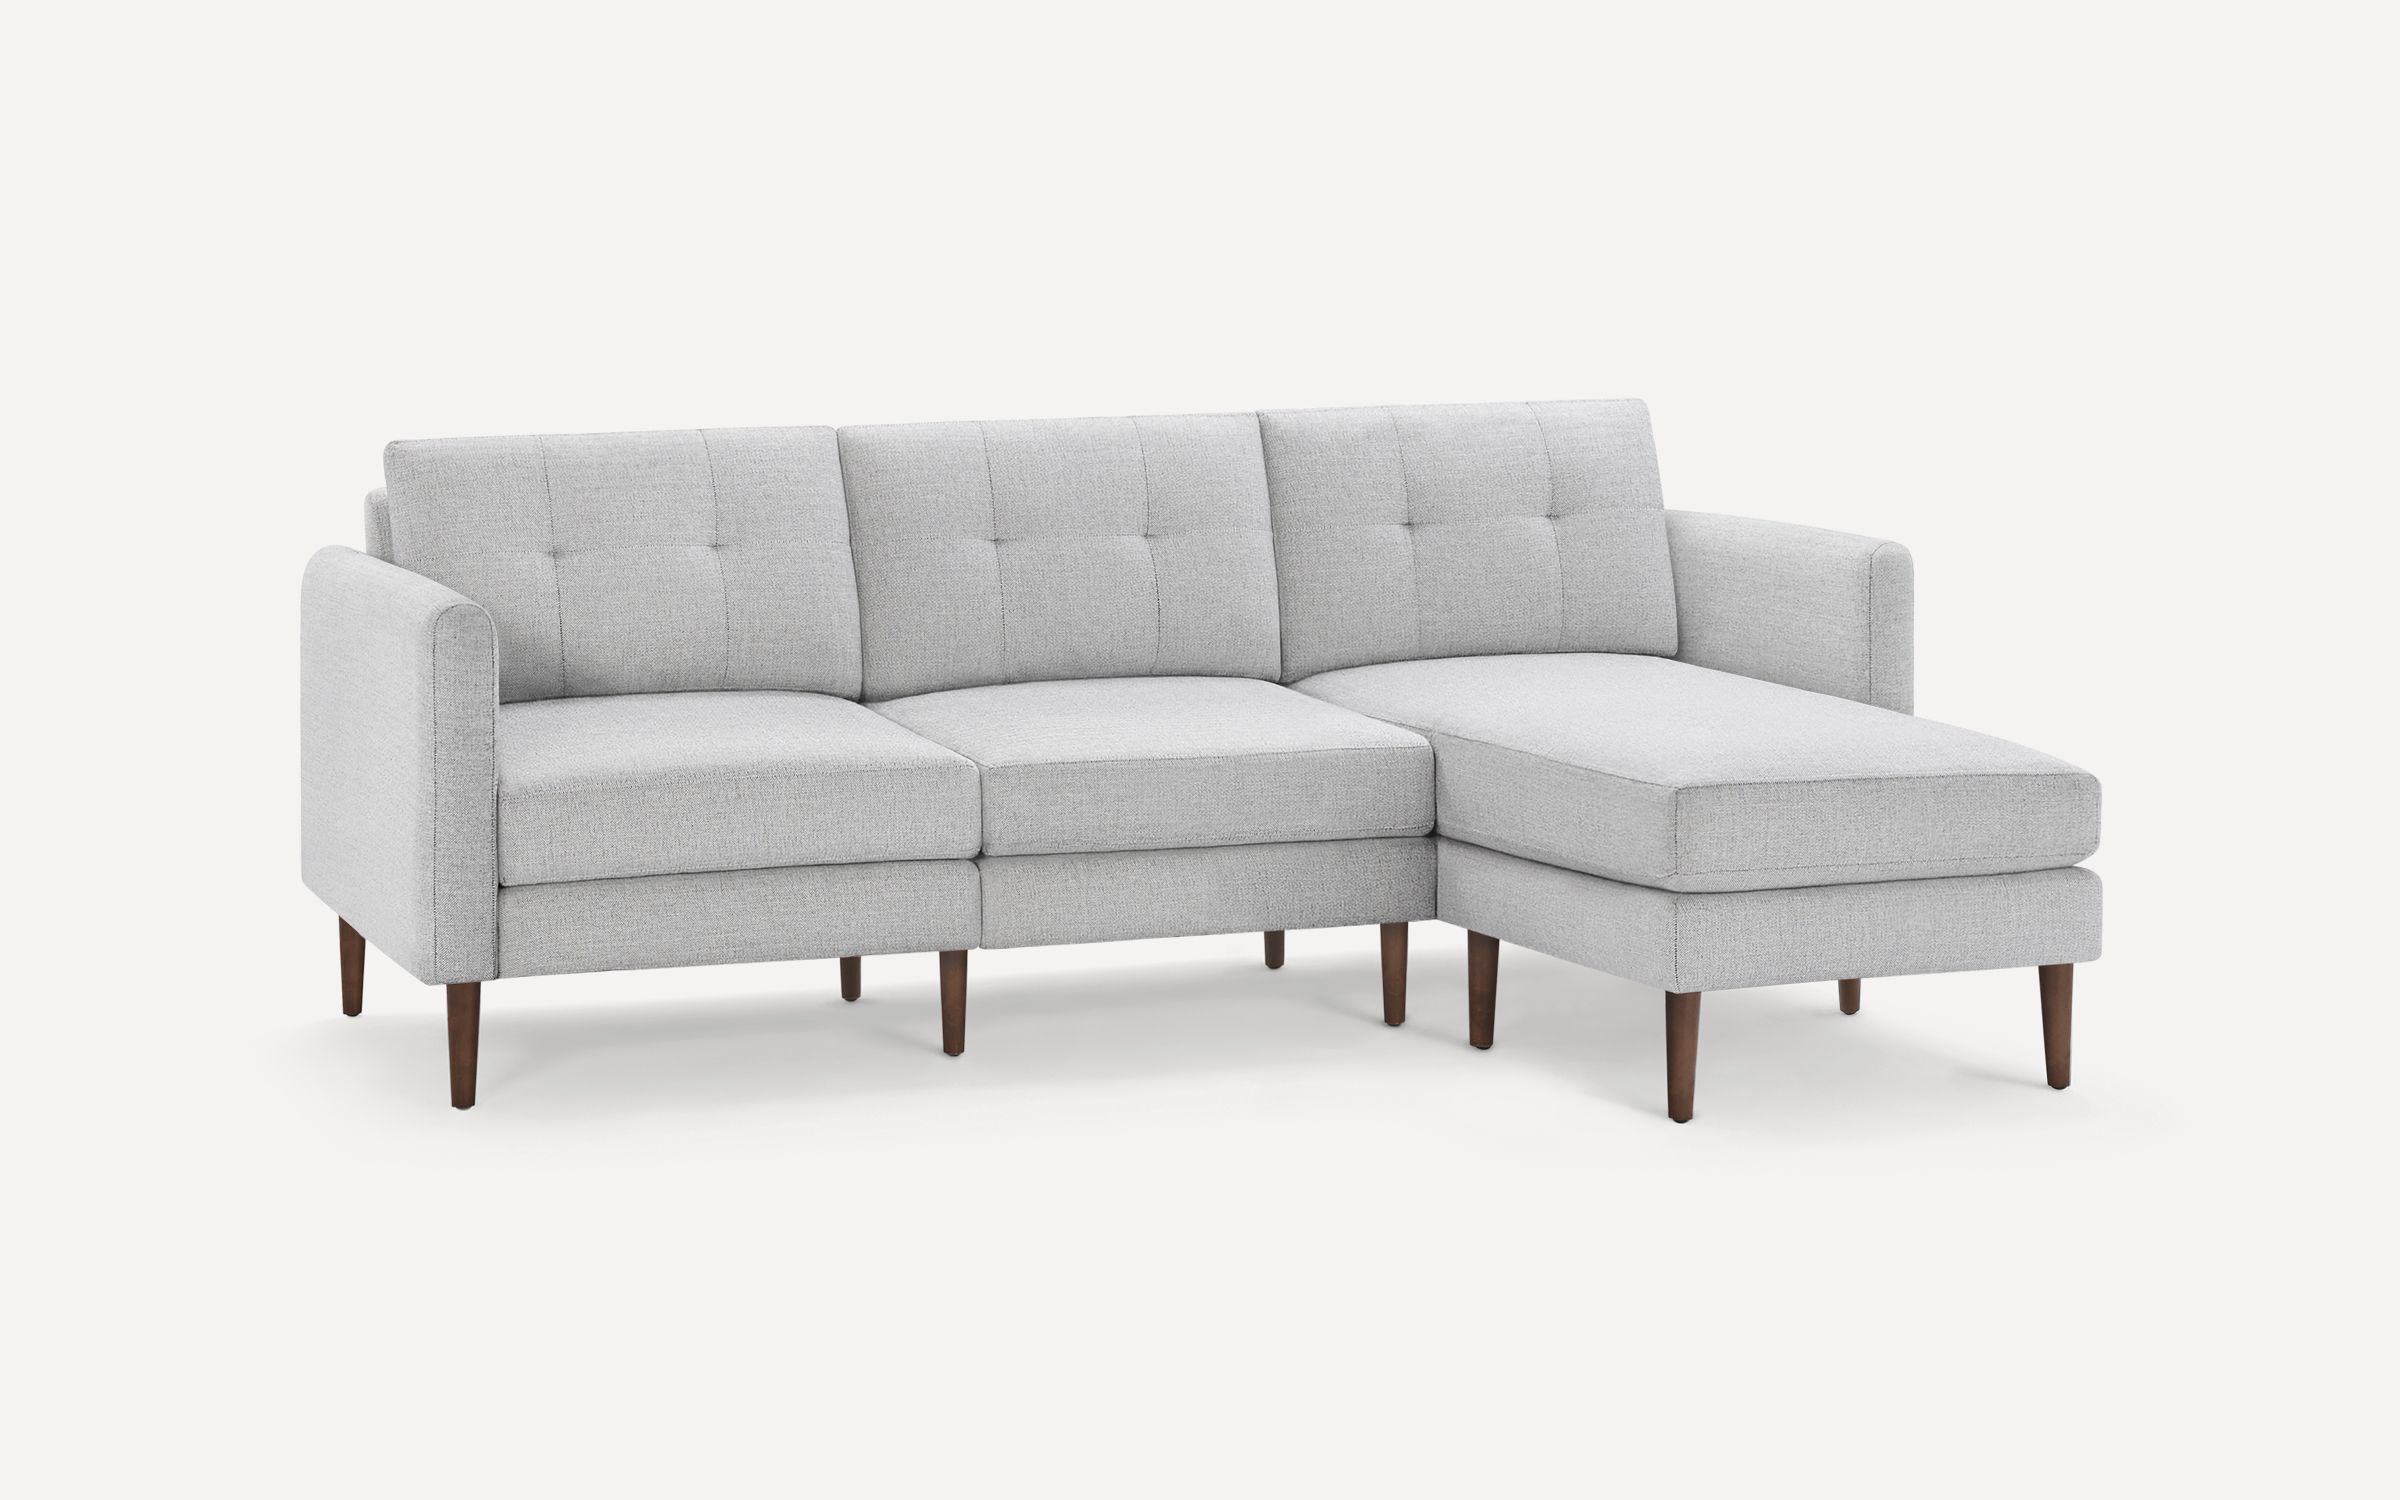 Modern Movable Sectional Couch | Burrow | Burrow